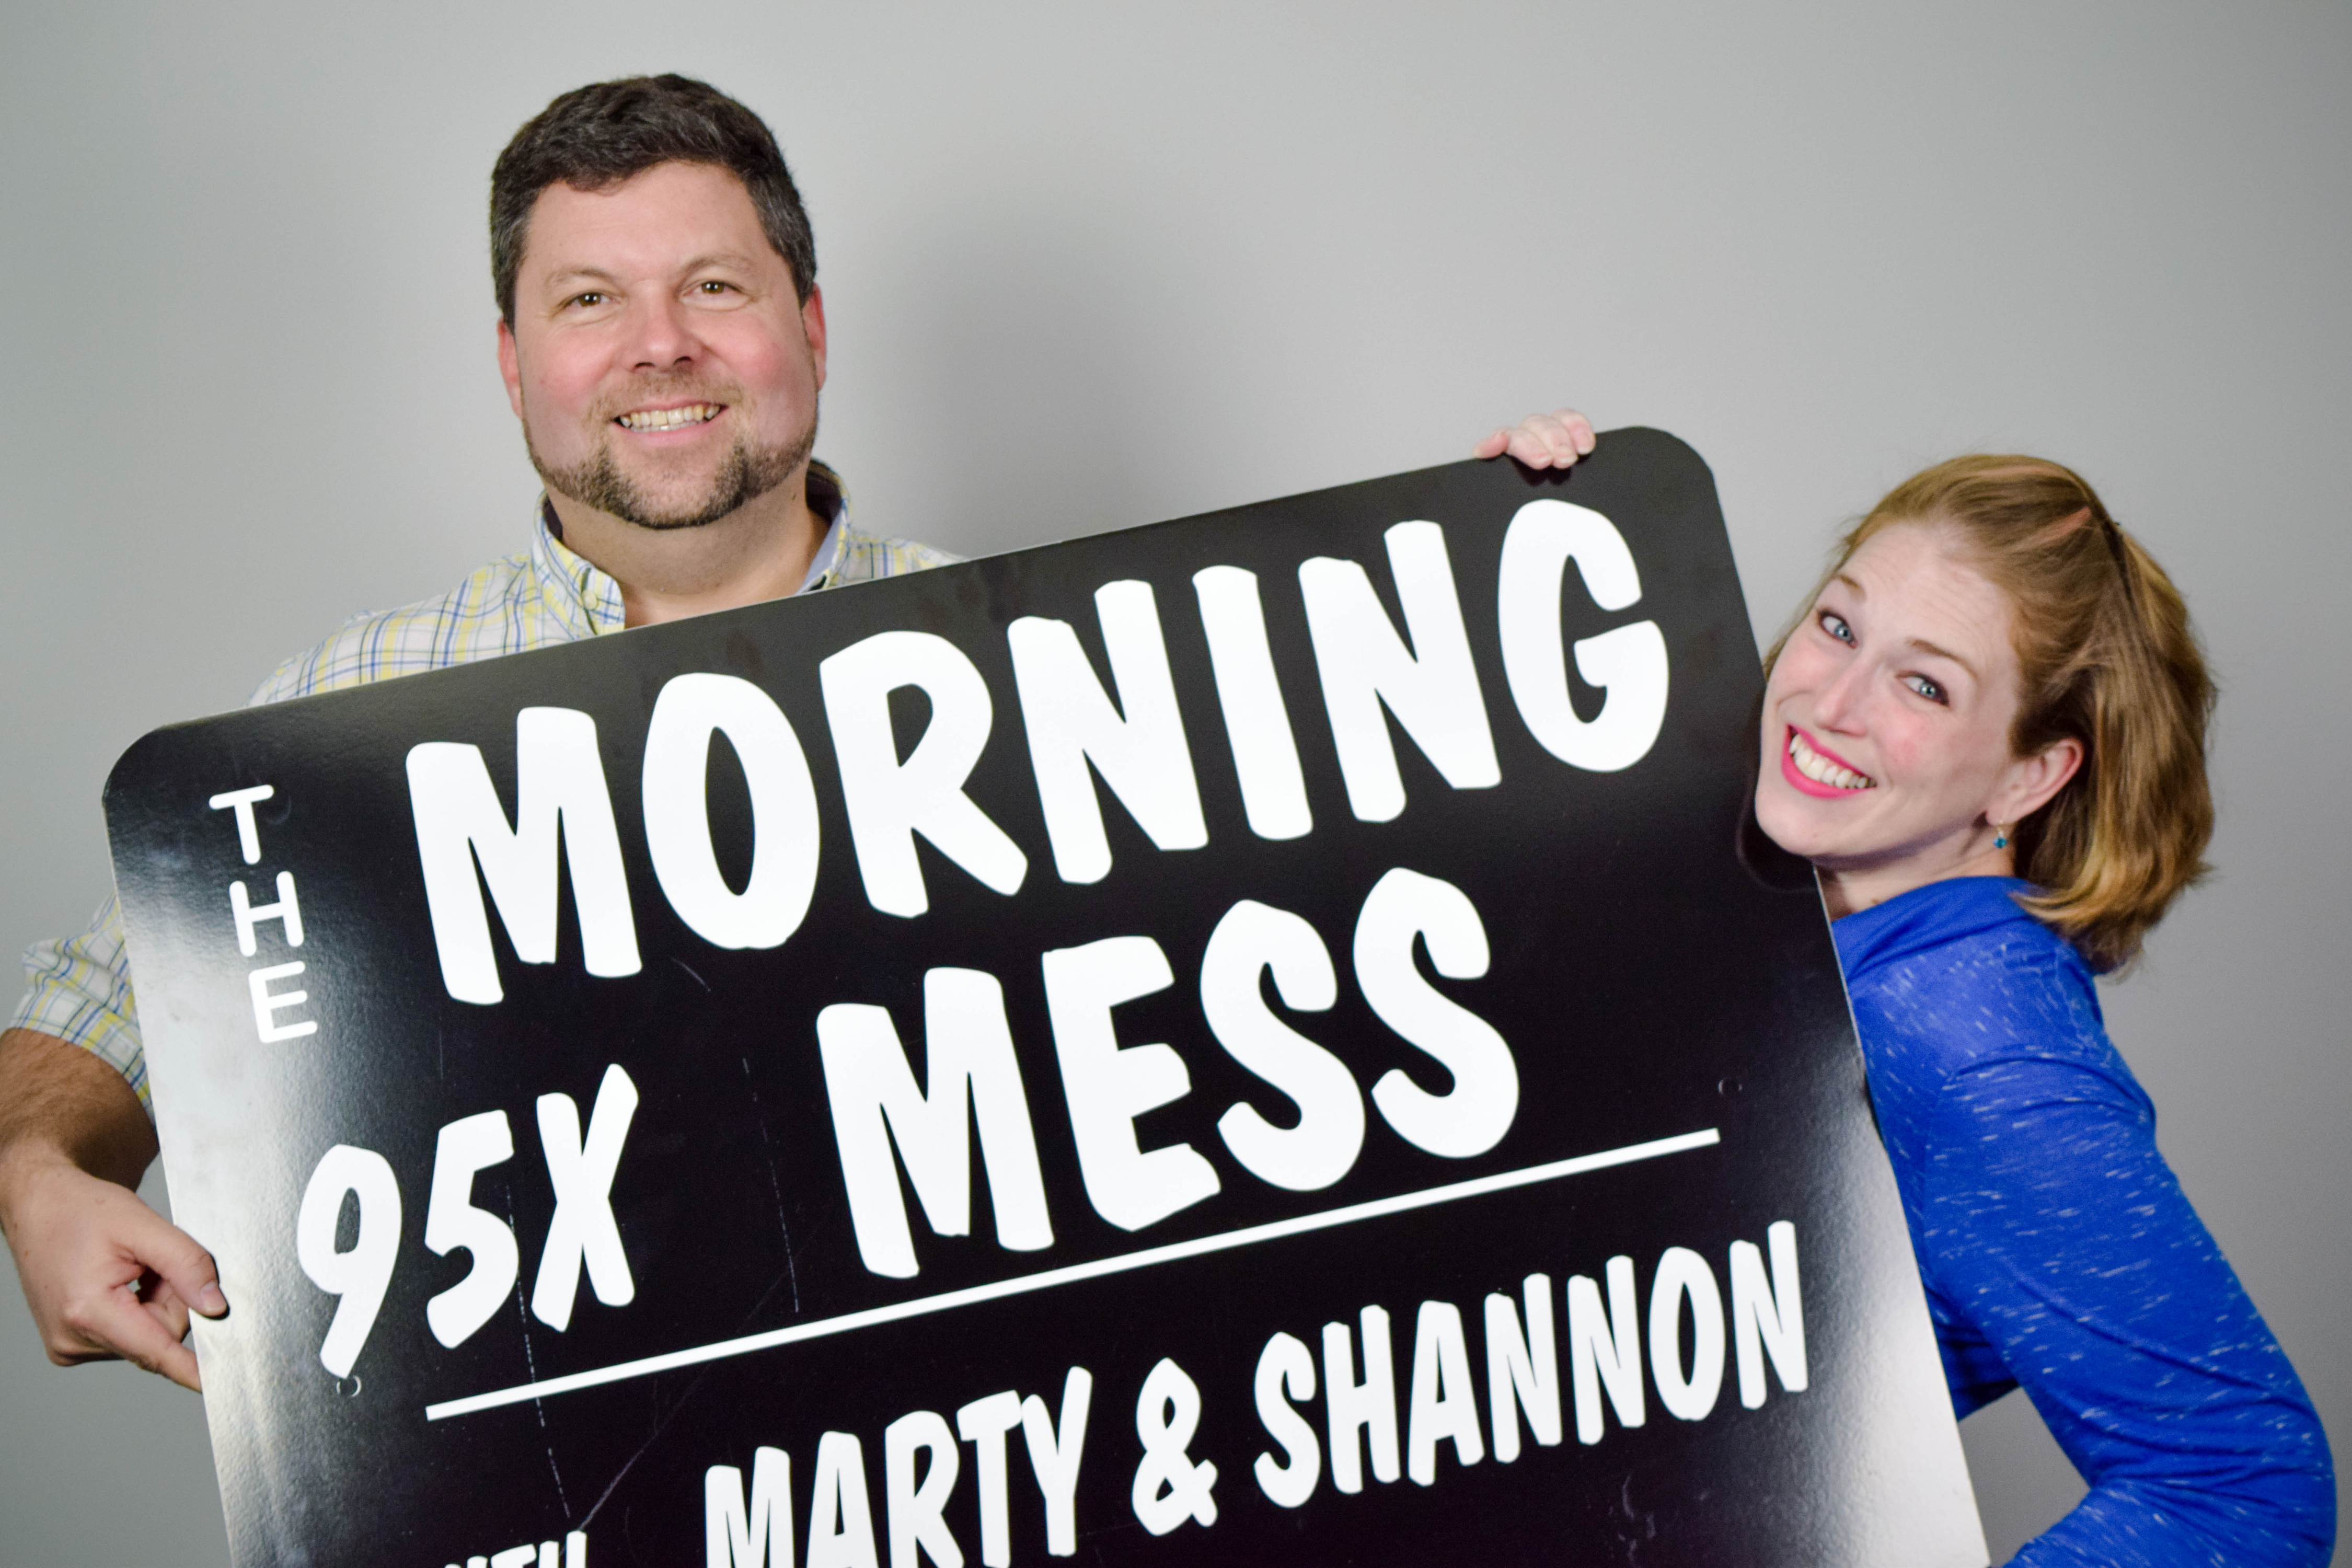 Marty & Shannon talk about Nurses Day and crazy patient stories